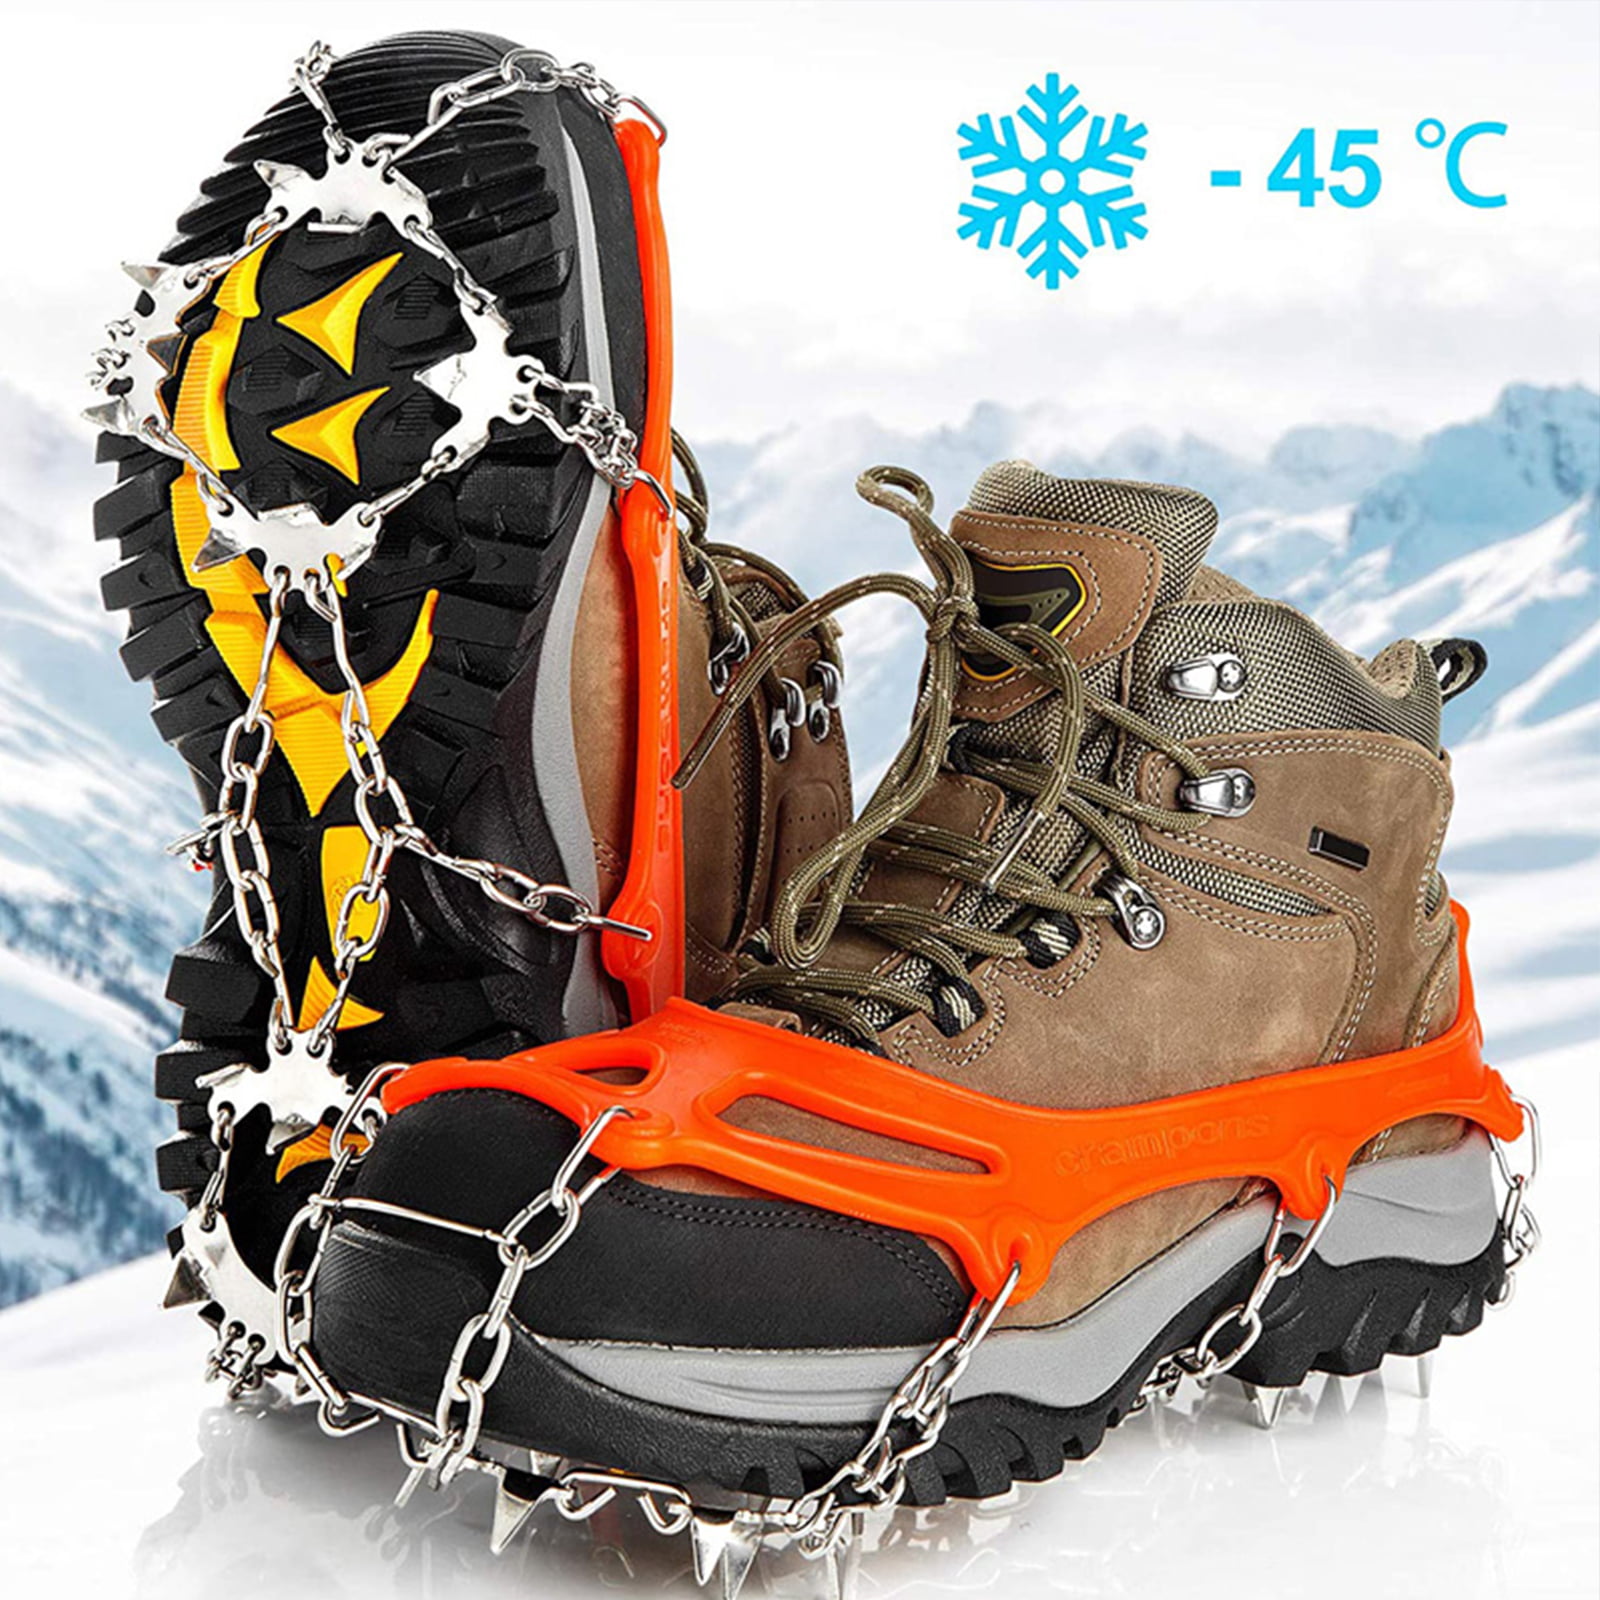 Crampons Ice Cleats Traction Snow Grips for Boots Shoes Women Men Kids Anti Slip 